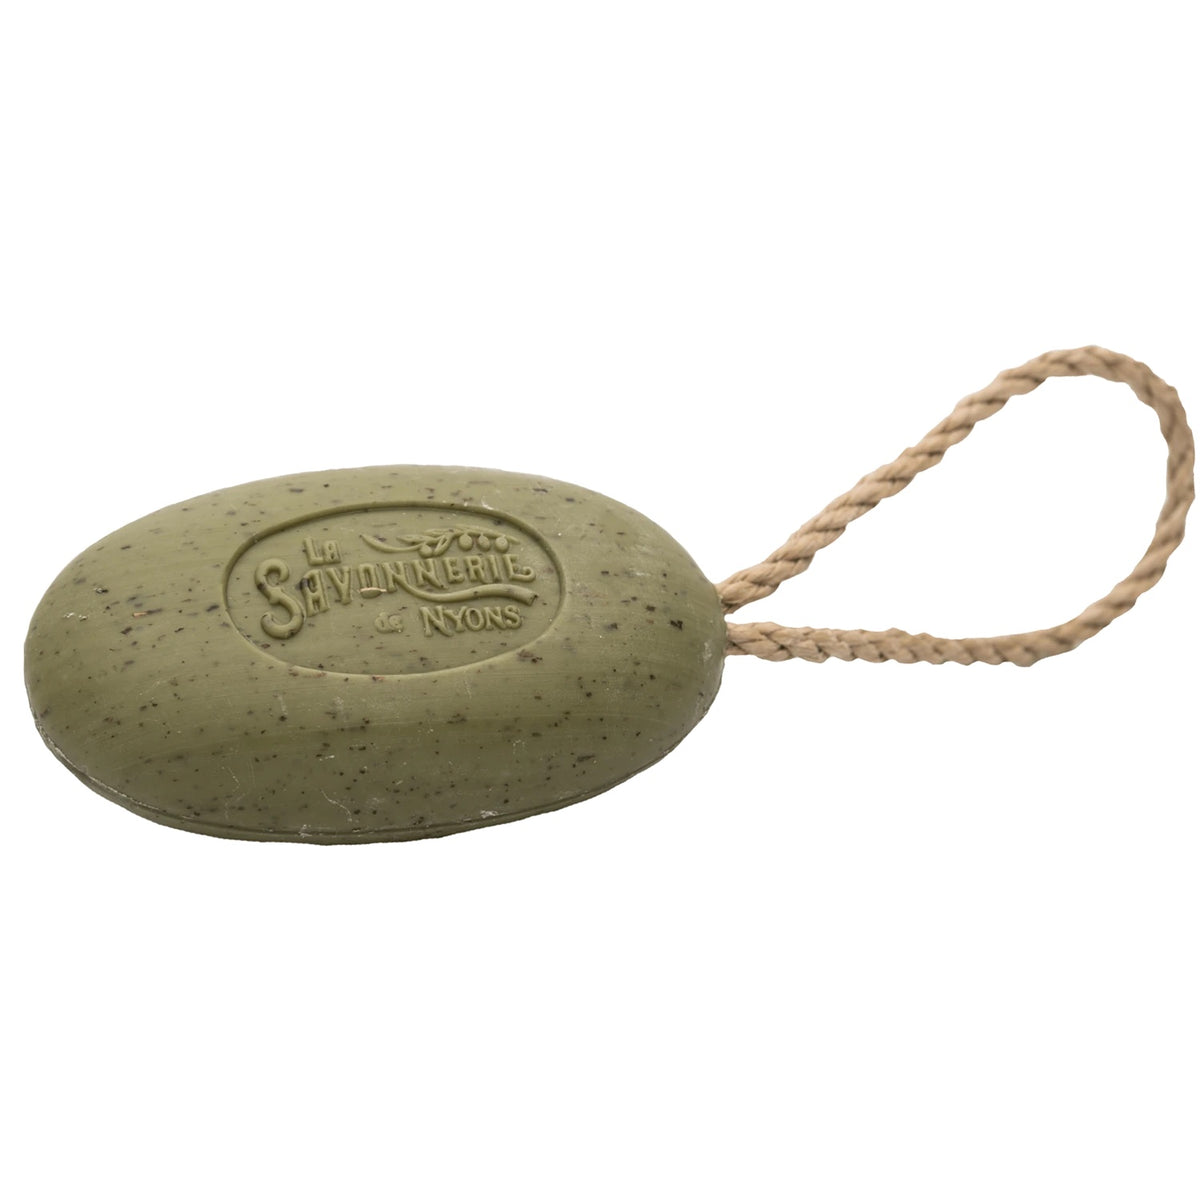 La Savonnerie de Nyons Exfoliating Green Olive Soap with Rope